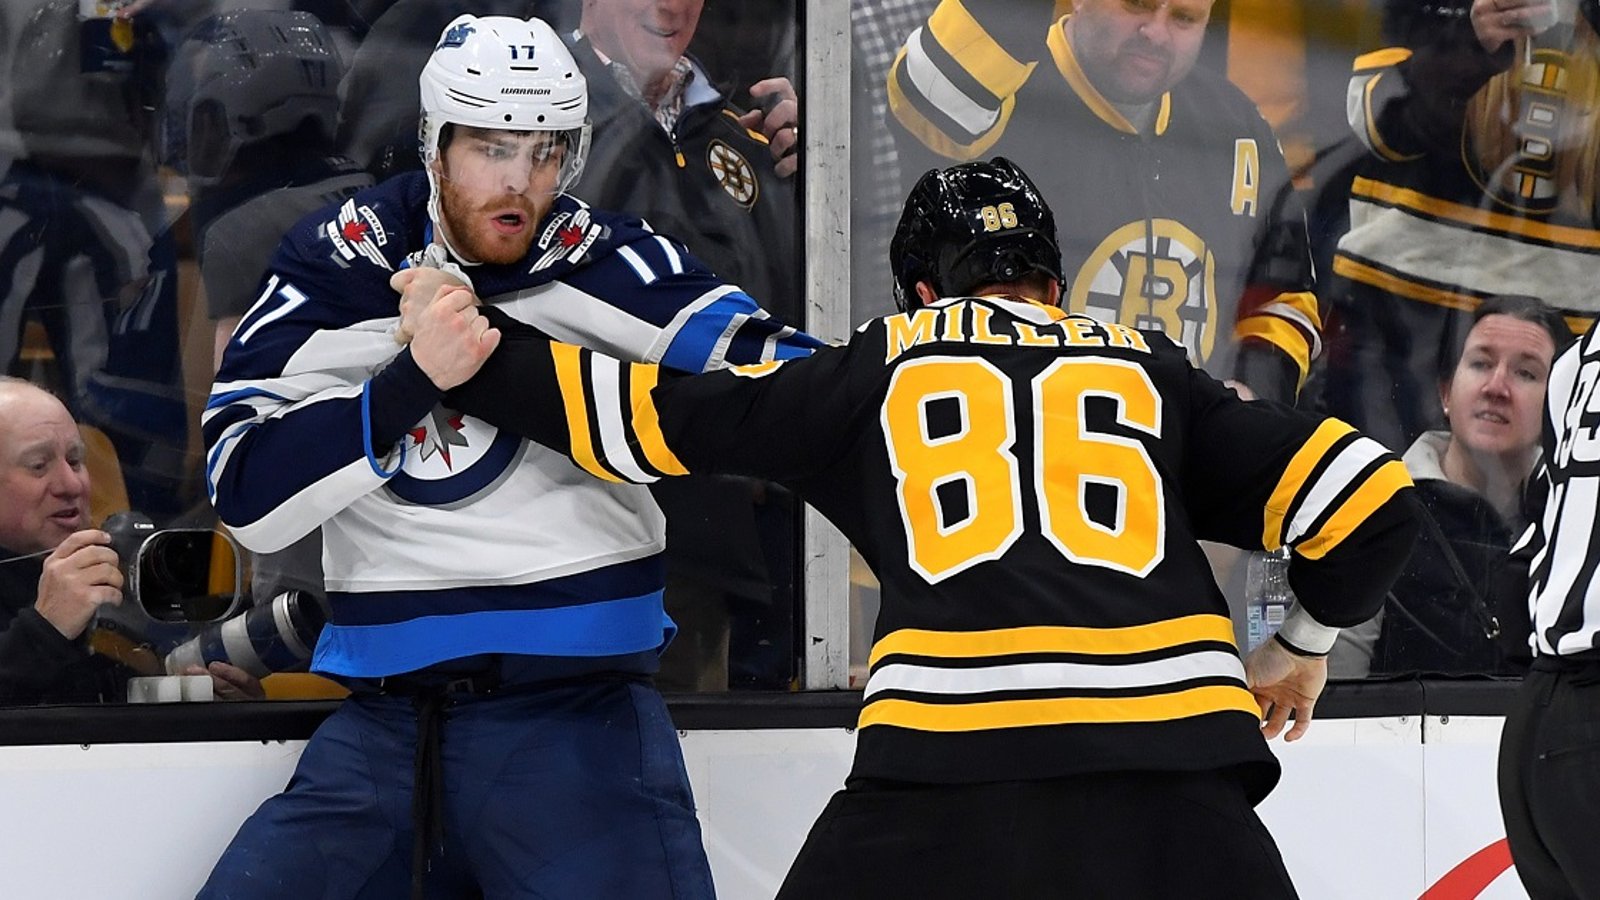 Breaking: Two Bruins expected to miss the Stanley Cup Final.